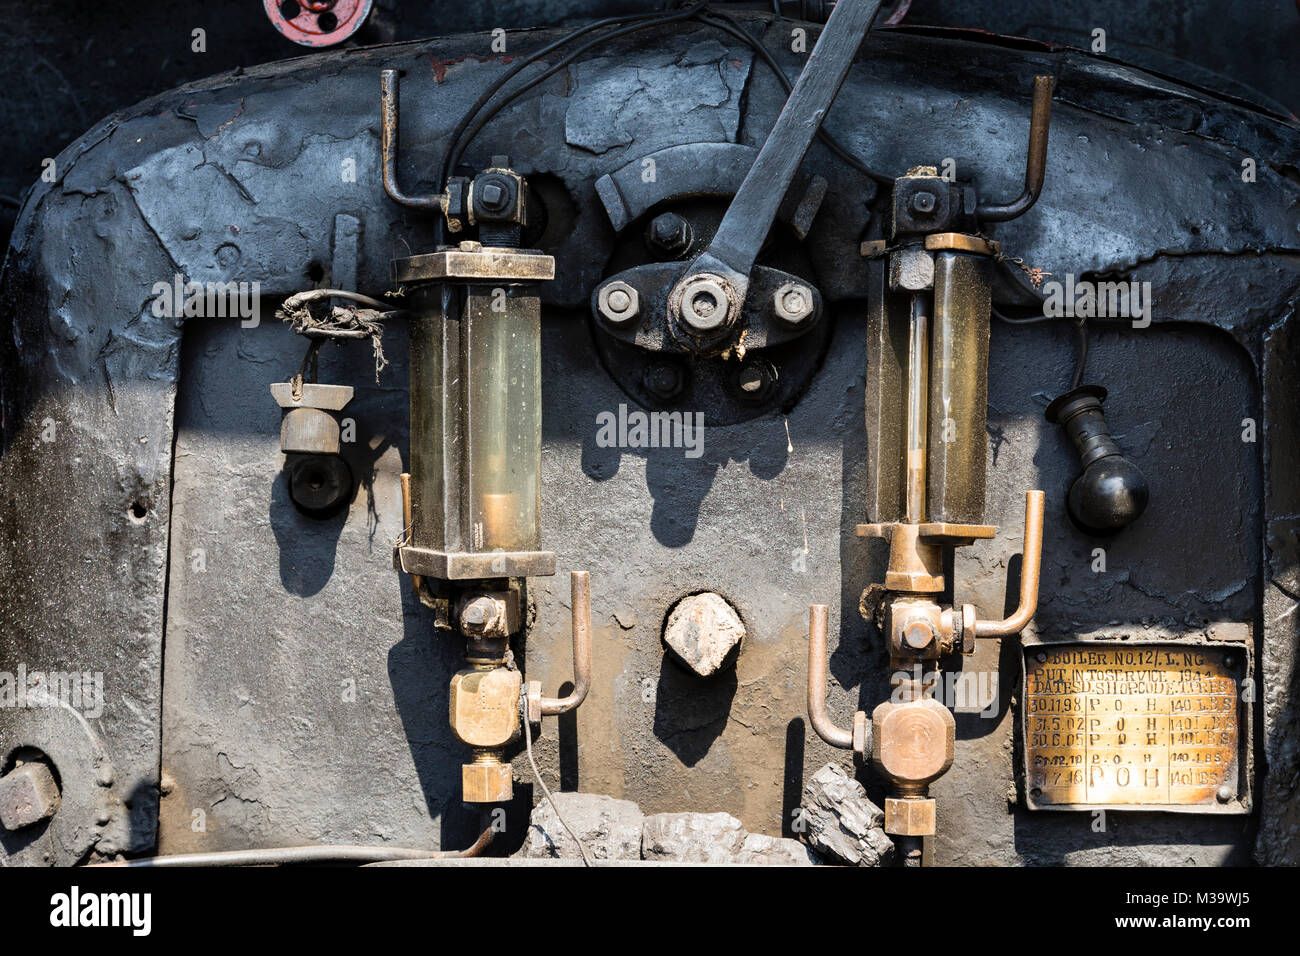 Darjeeling, India, March 3 2017: Closeup of the steam locomotive fire boiler of the famous toy train Stock Photo